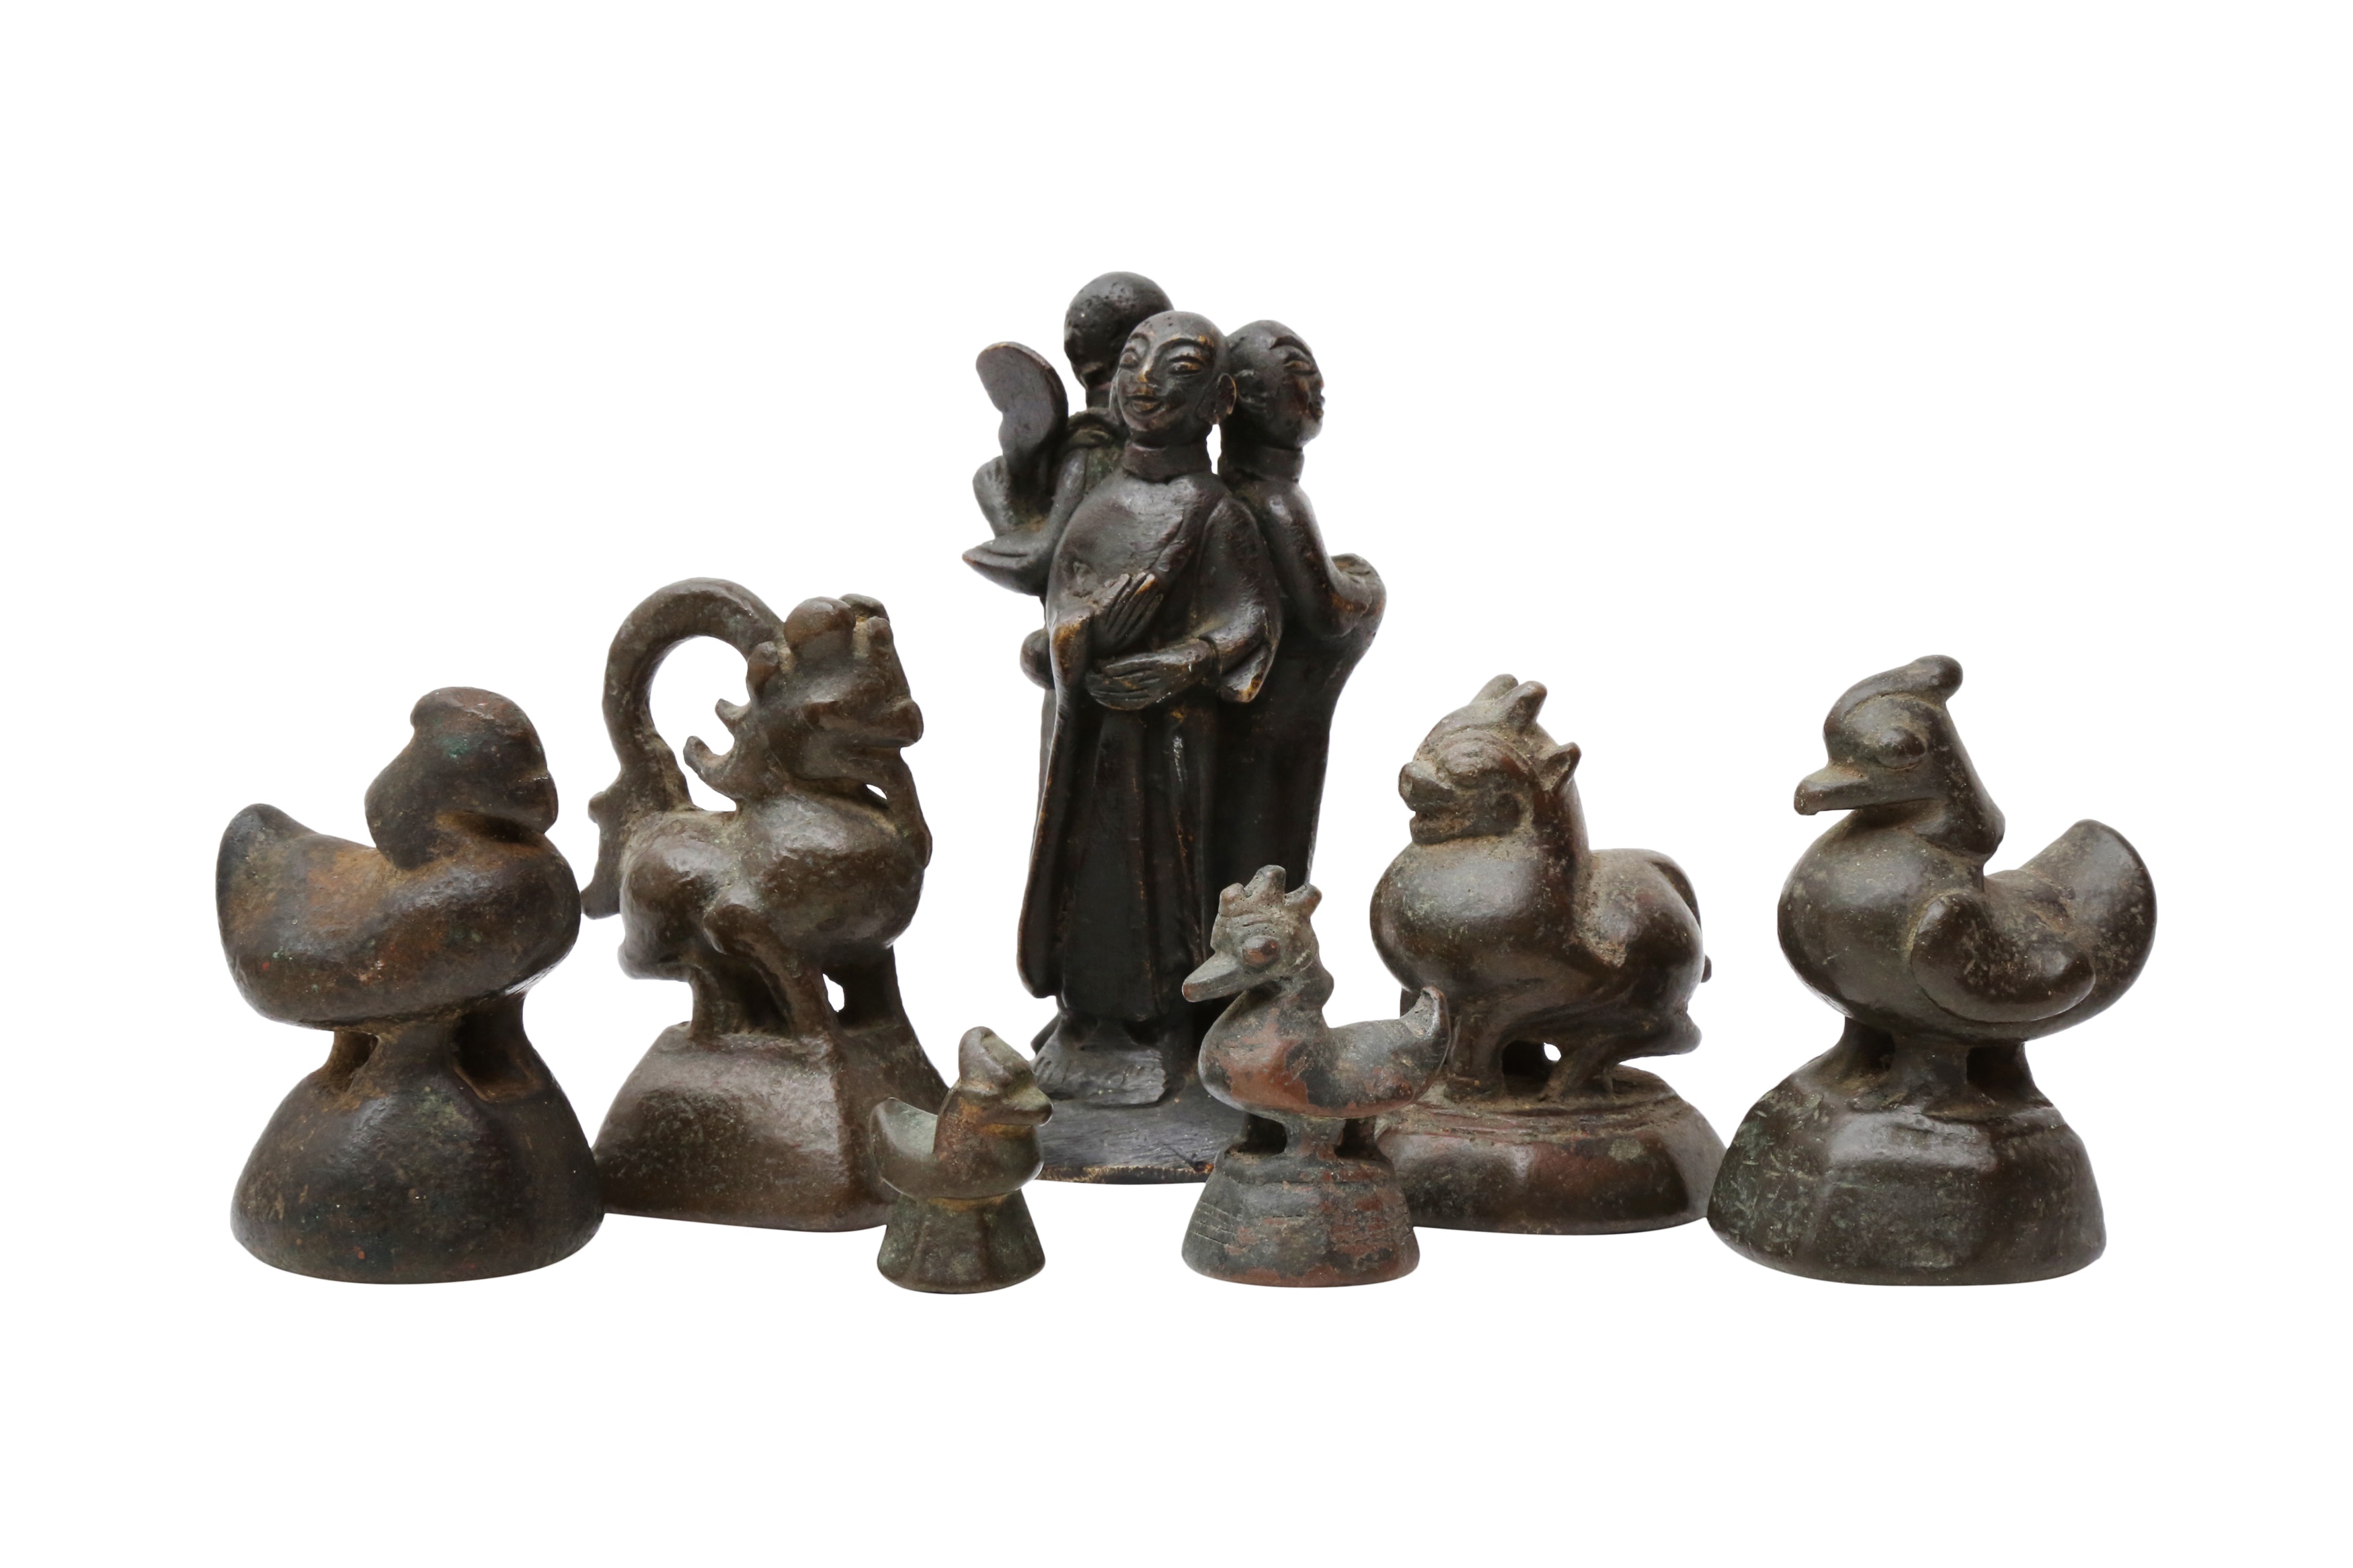 A GROUP OF SEVEN BURMESE BRONZE WEIGHTS OFFERED ON BEHALF OF PROSPECT BURMA TO BENEFIT EDUCATIONAL